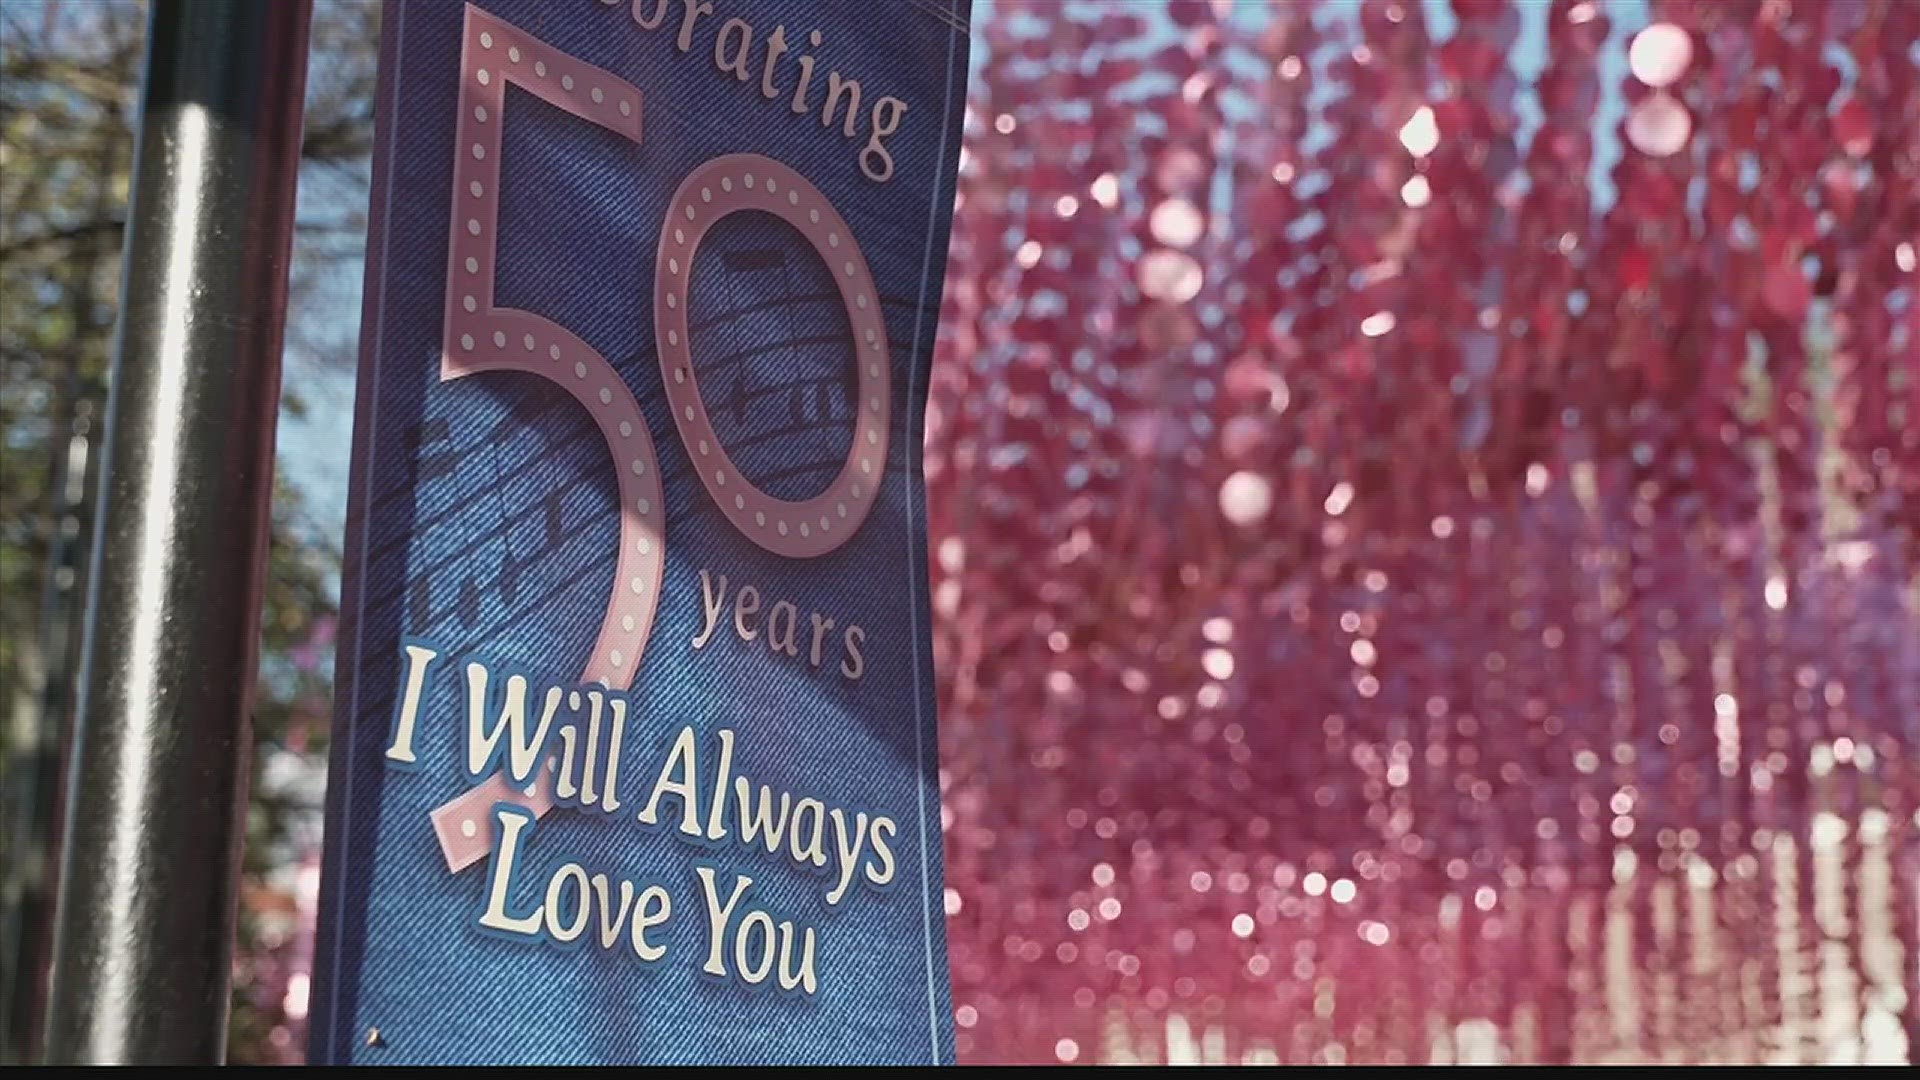 We sit down with Joshua Sauer to explore the "I Will Always Love You" Celebration at Dollywood this year.